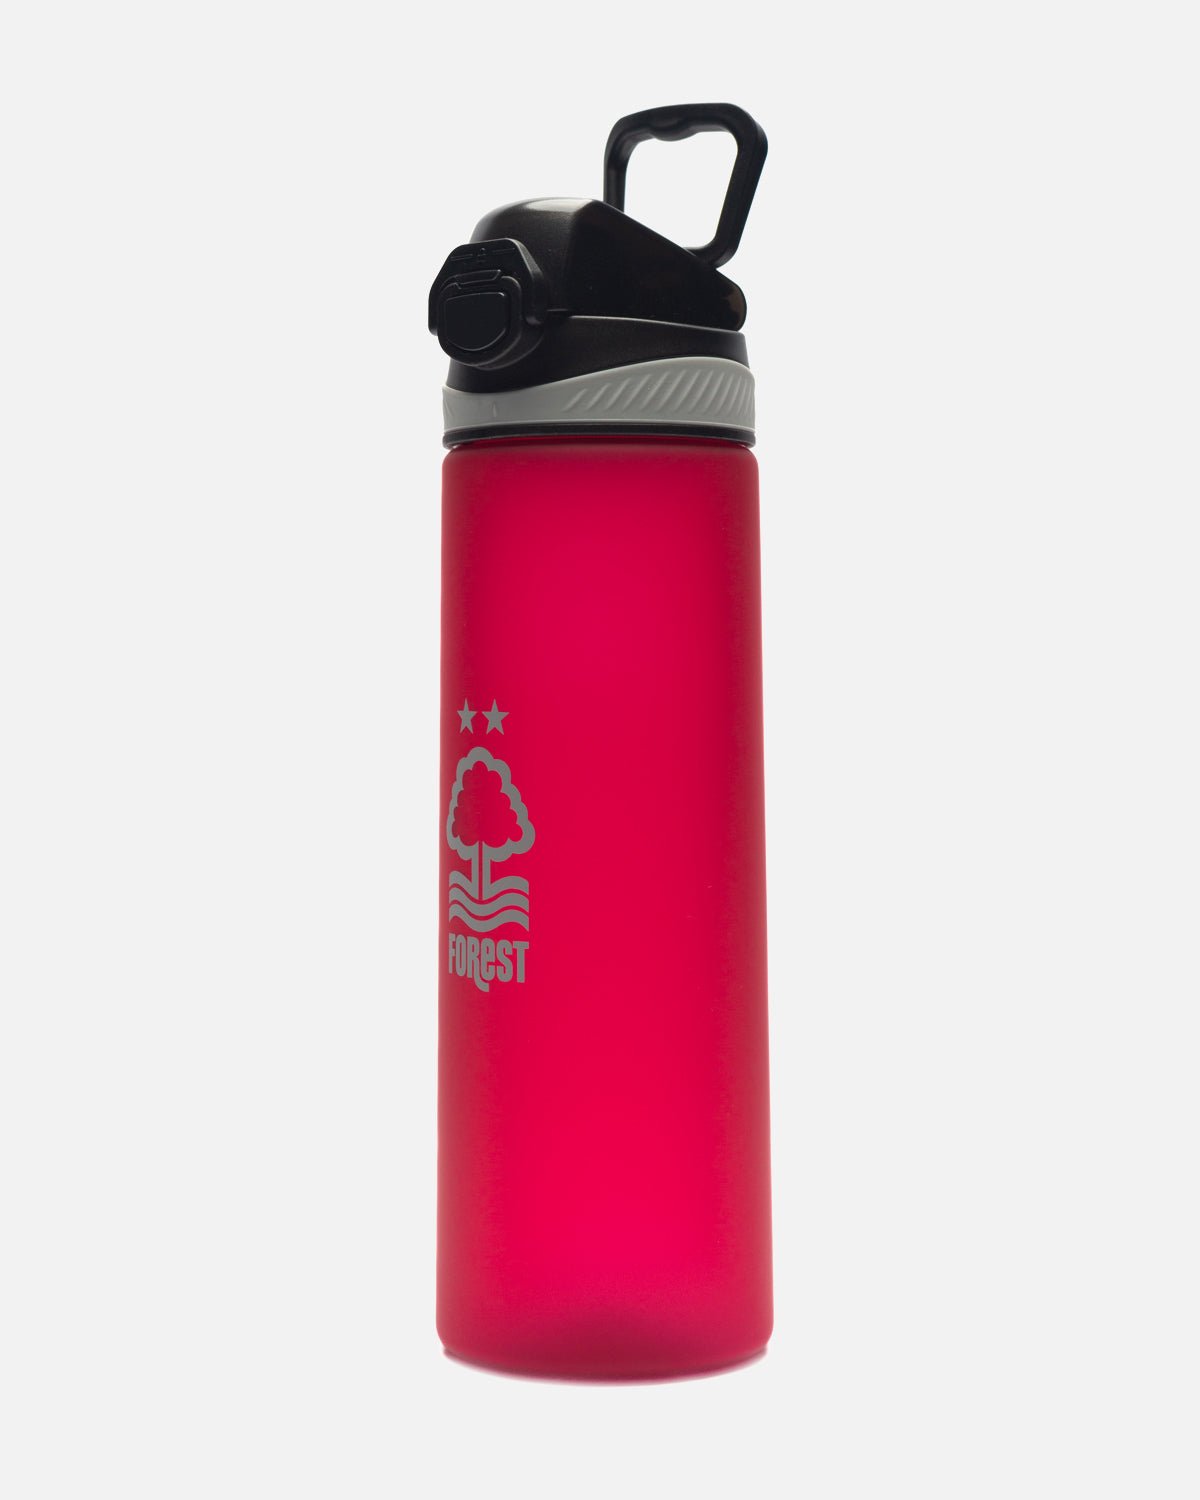 NFFC Ultimate Soft Touch Bottle - Nottingham Forest FC